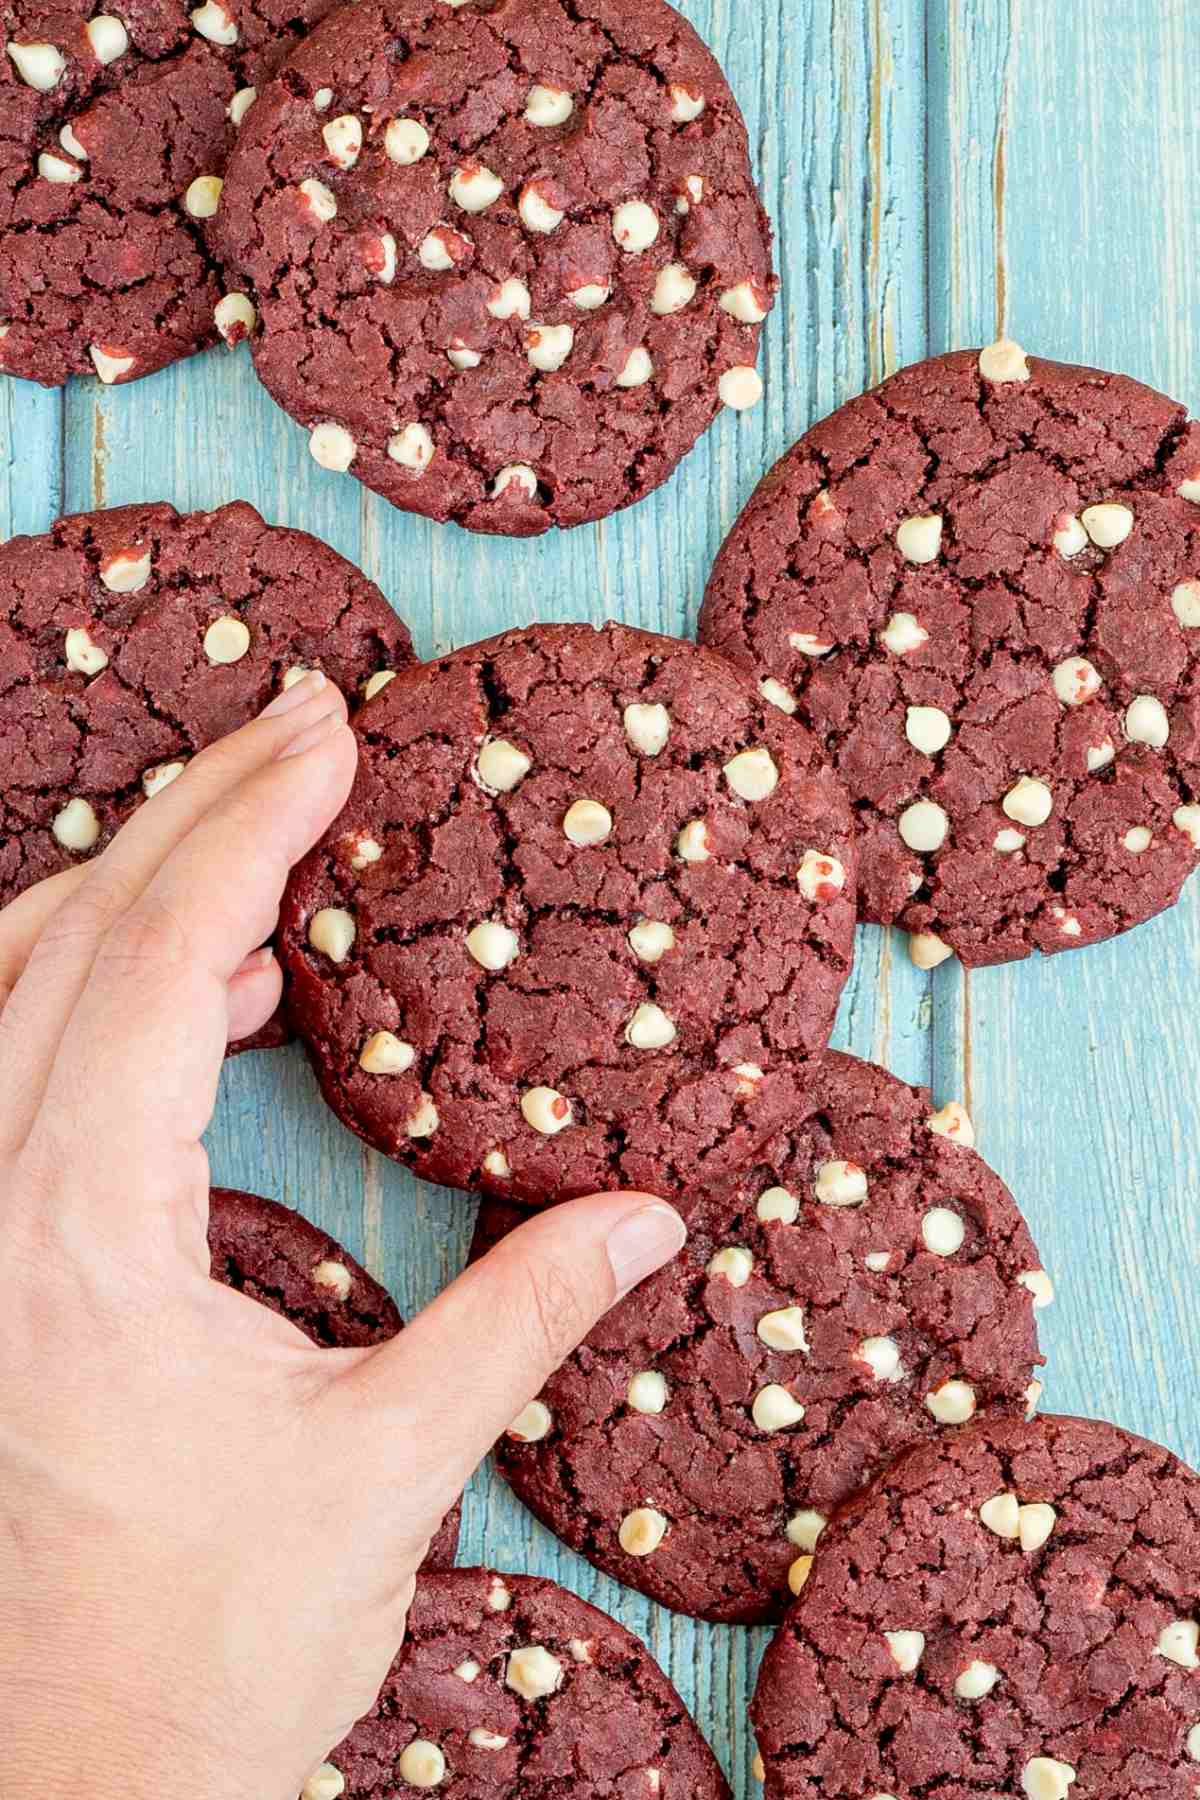 Lot of red velvet cookies with white chocolate chips on a light blue wooden surface. A hand is taking one cookie from the middle.